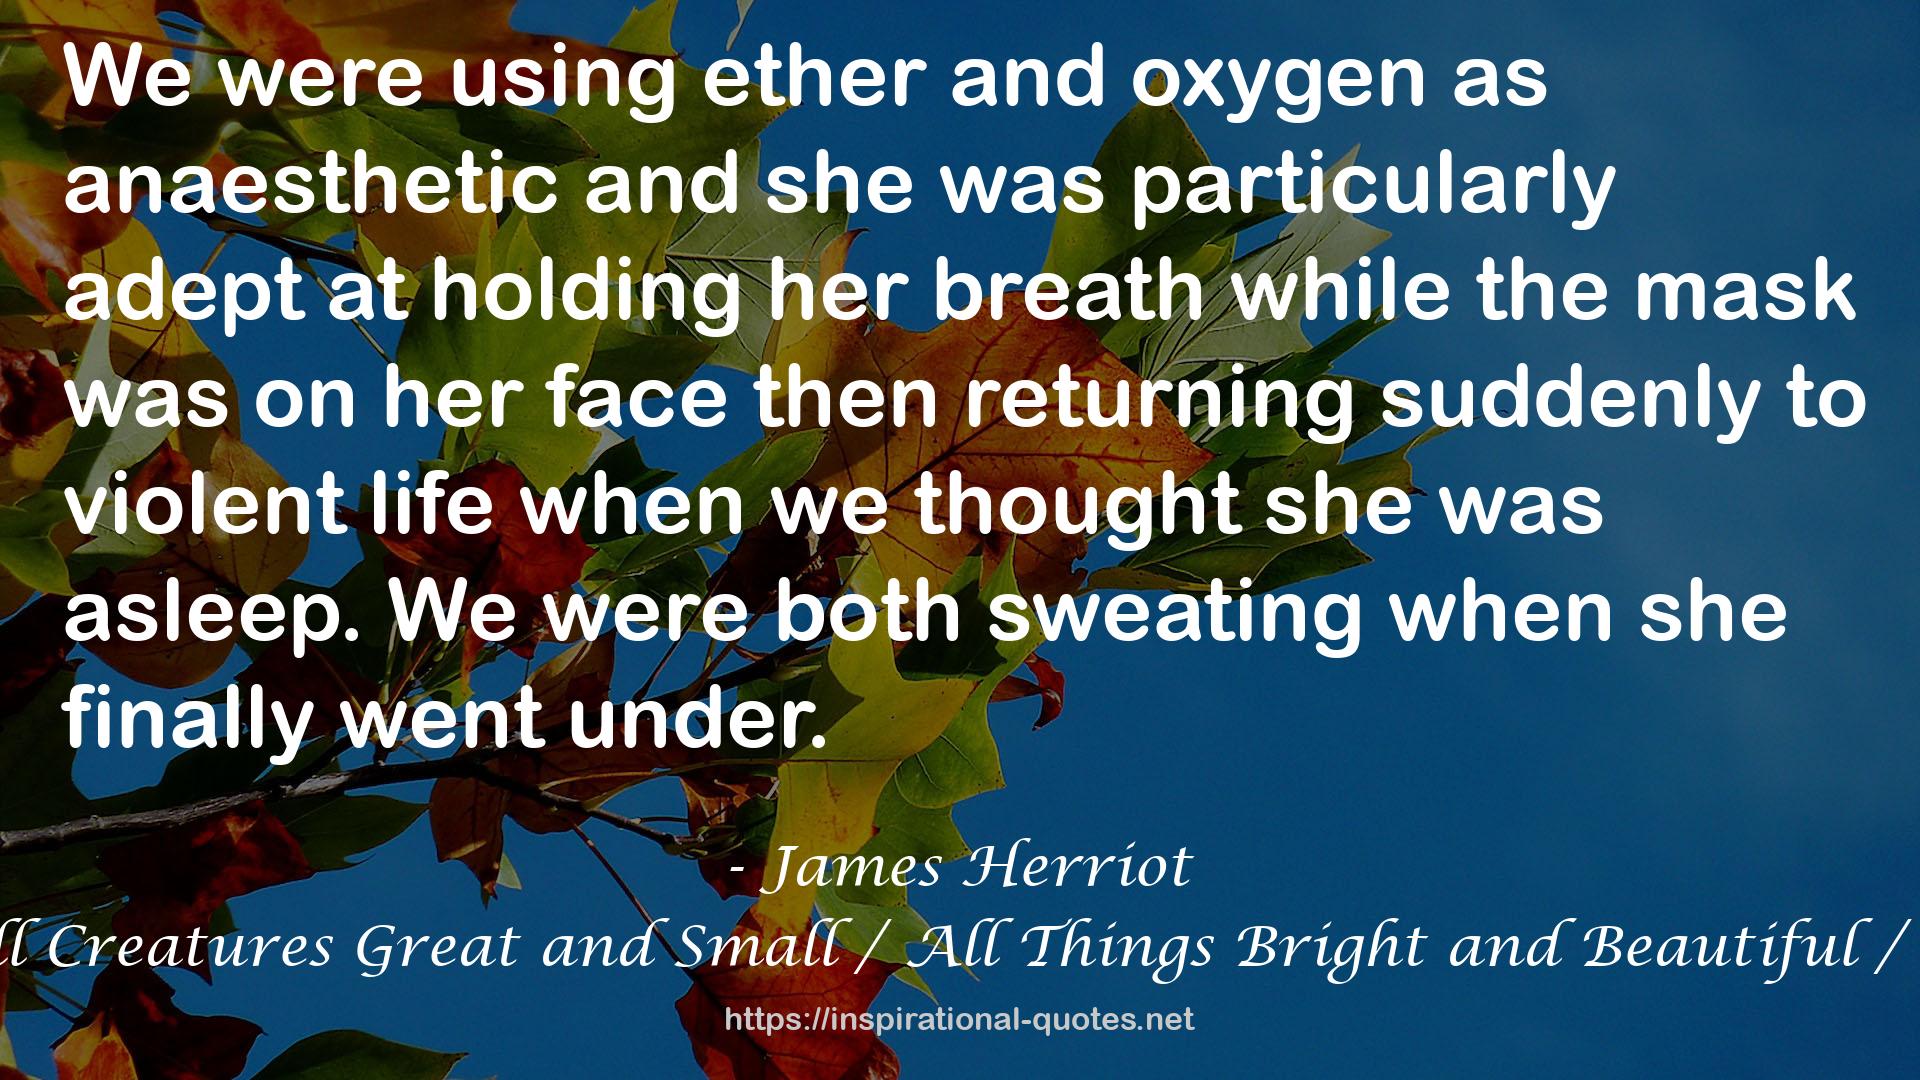 Three James Herriot Classics: All Creatures Great and Small / All Things Bright and Beautiful / All Things Wise and Wonderful QUOTES